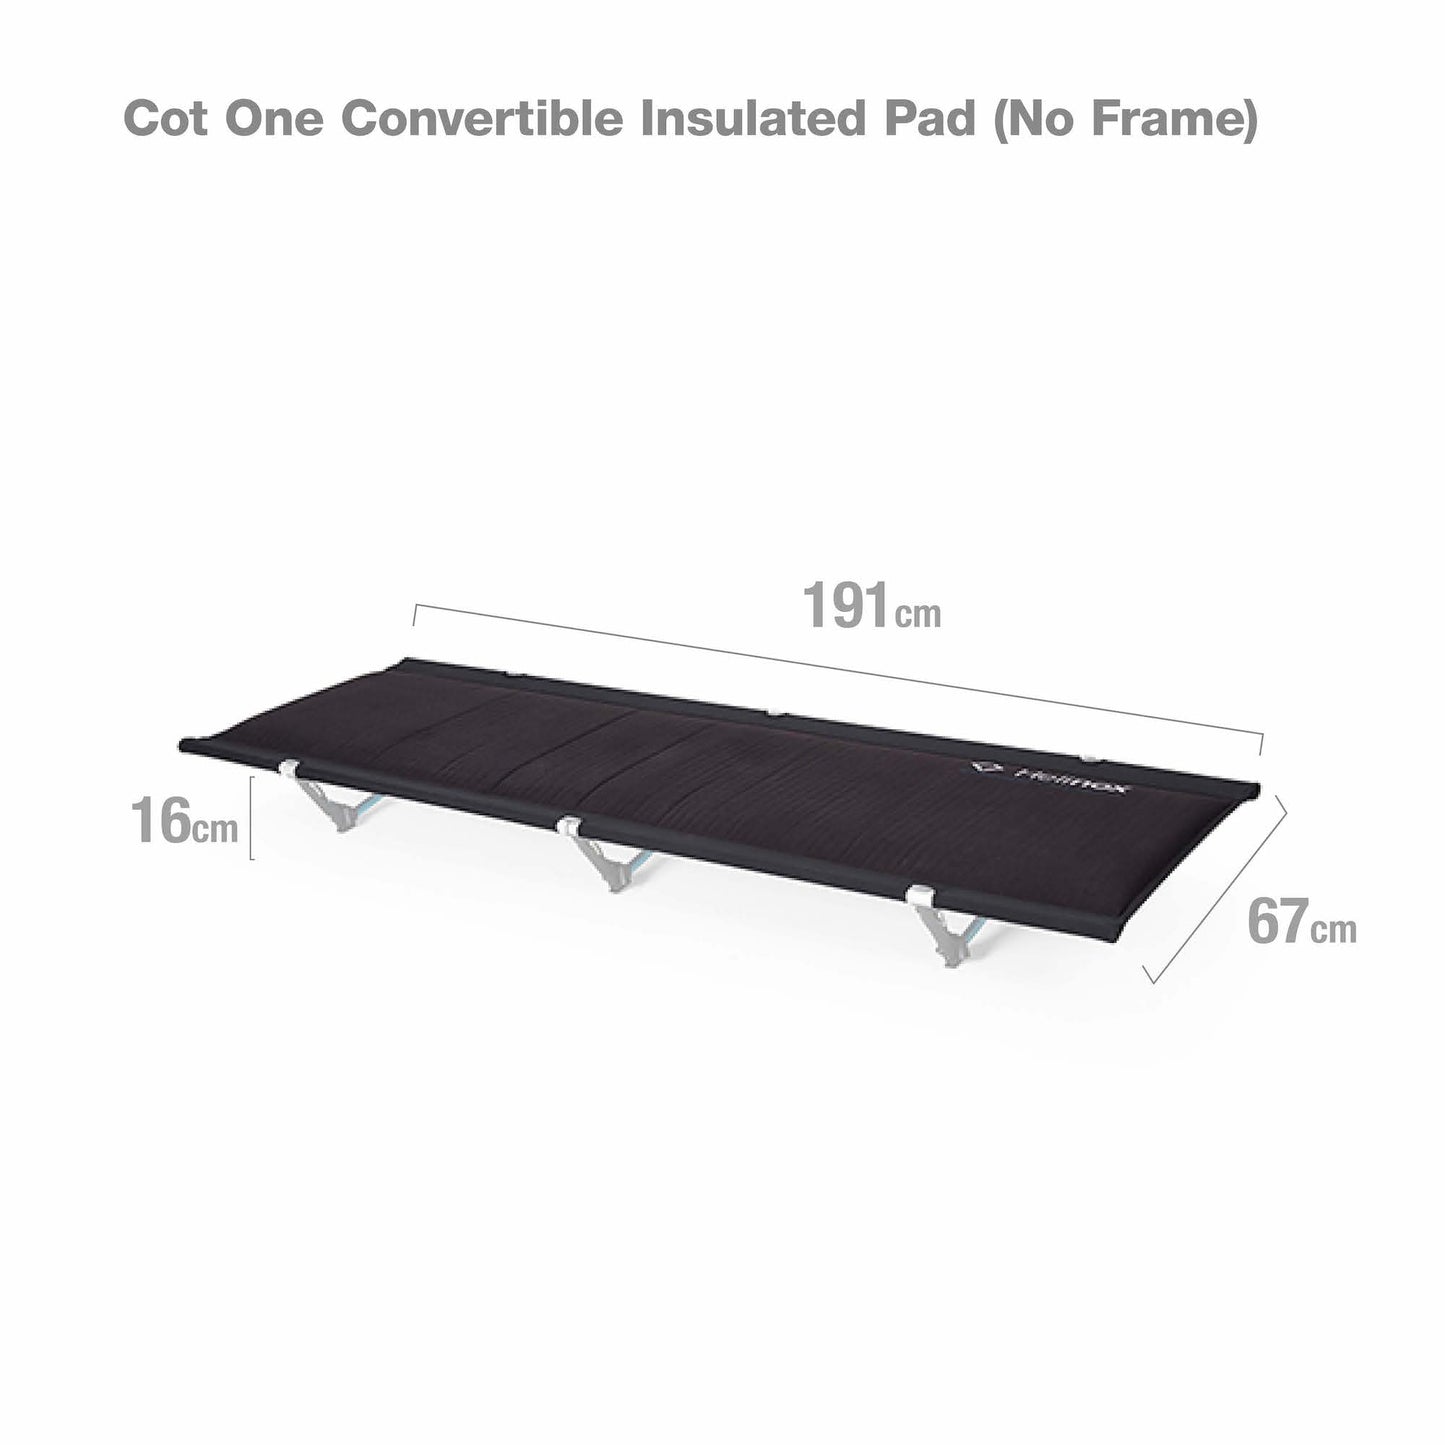 Insulated Cot One Pad (No Frame) - Black